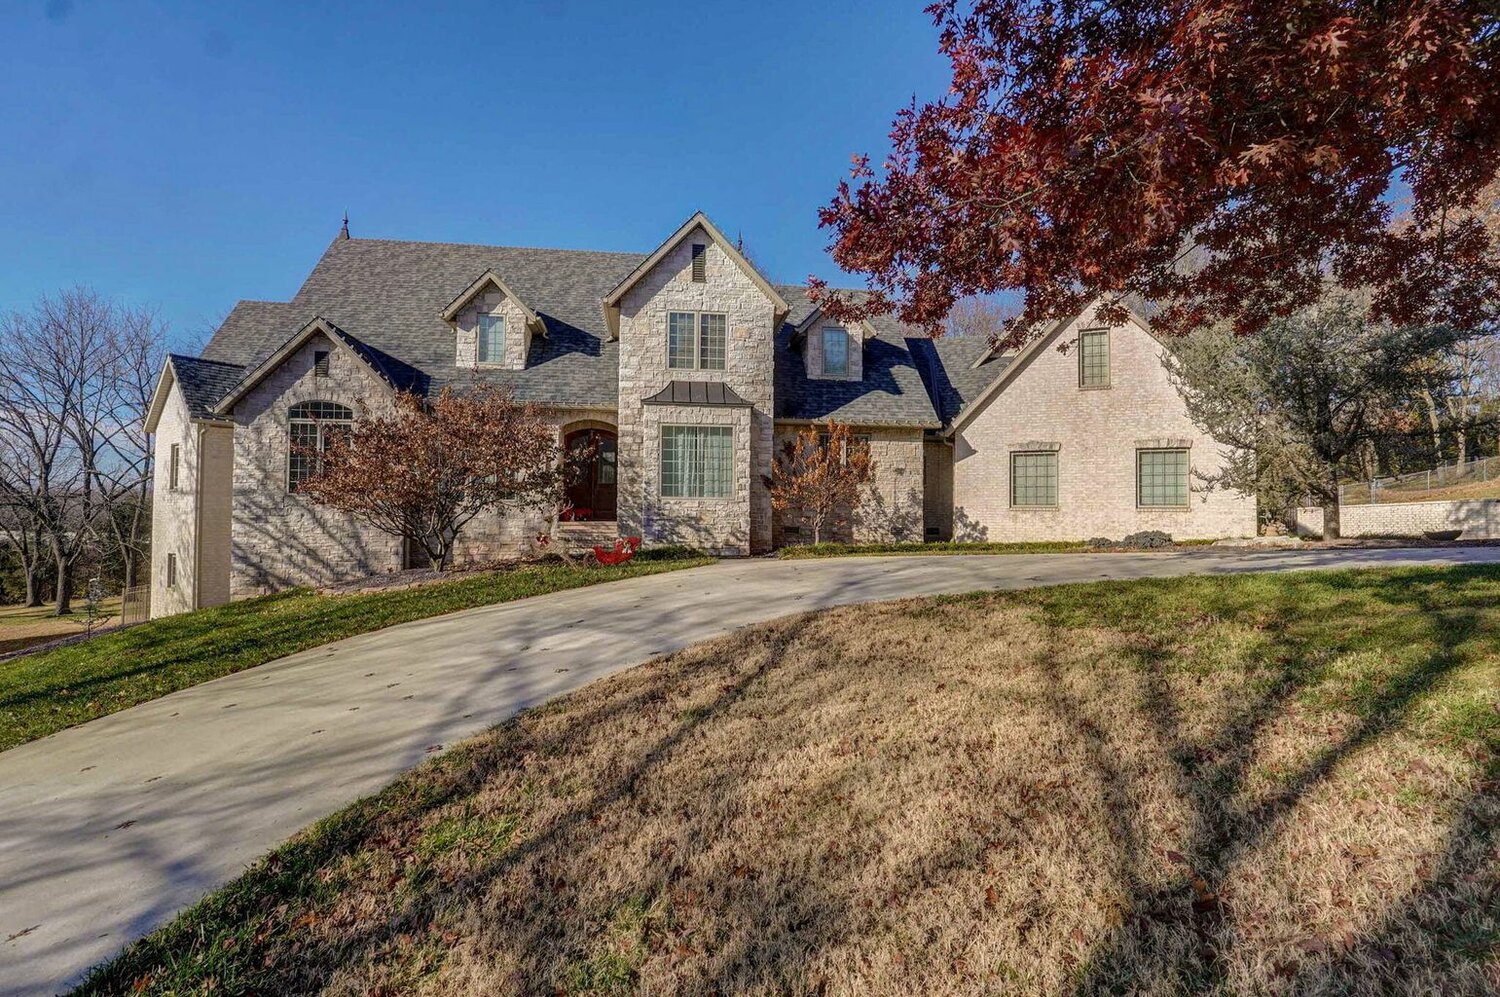 5449 S. Woodcliffe Drive
$825,000
Bedrooms: 6
Bathrooms: 5
Listing firm: Alpha Realty MO LLC